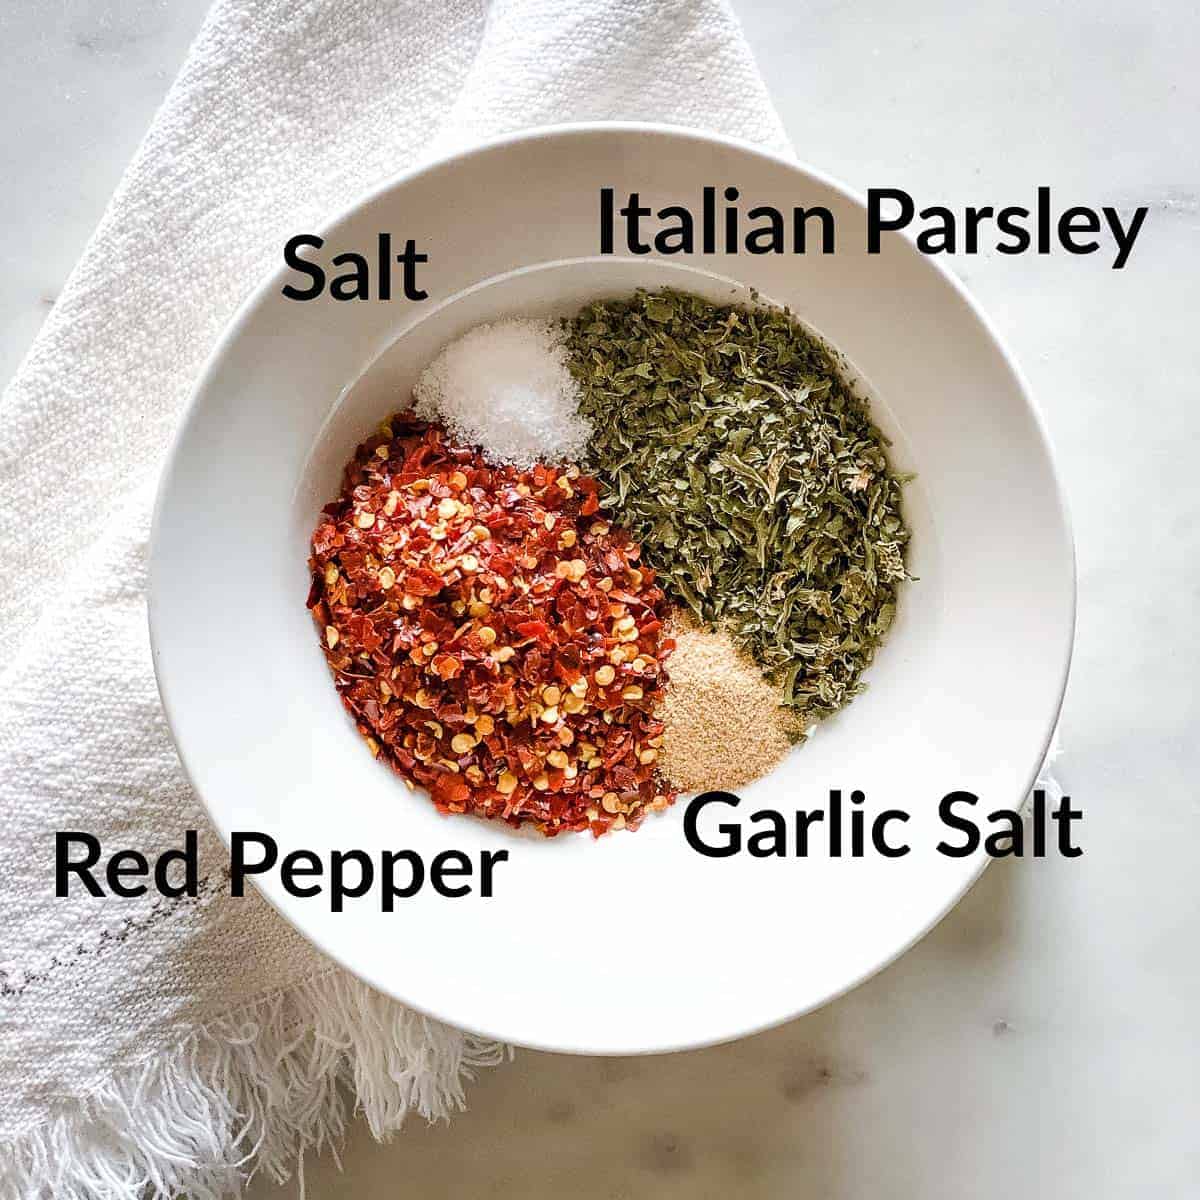 White bowl with spices arranged in a circle and labeled clockwise from top: Italian Parsley, Garlic Salt, Red Pepper, and Salt. Bowl is placed on a off white, fringed napkin on a white marble background.